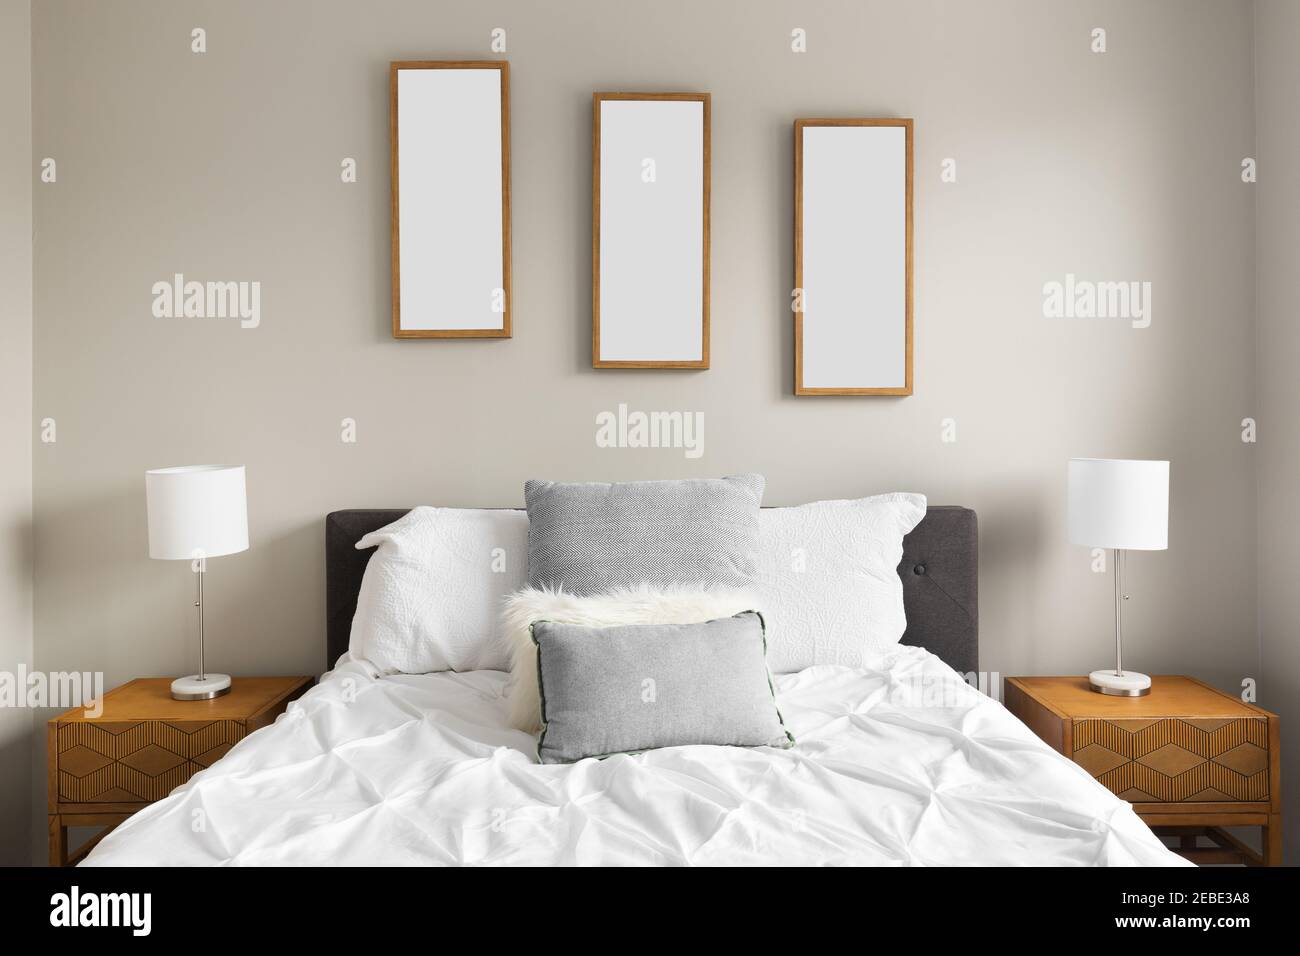 https://c8.alamy.com/comp/2EBE3A8/detail-shot-of-a-cozy-bedroom-with-white-bedding-and-grey-pillows-pictures-of-leaves-above-the-bed-and-lamps-on-wooden-nightstands-2EBE3A8.jpg